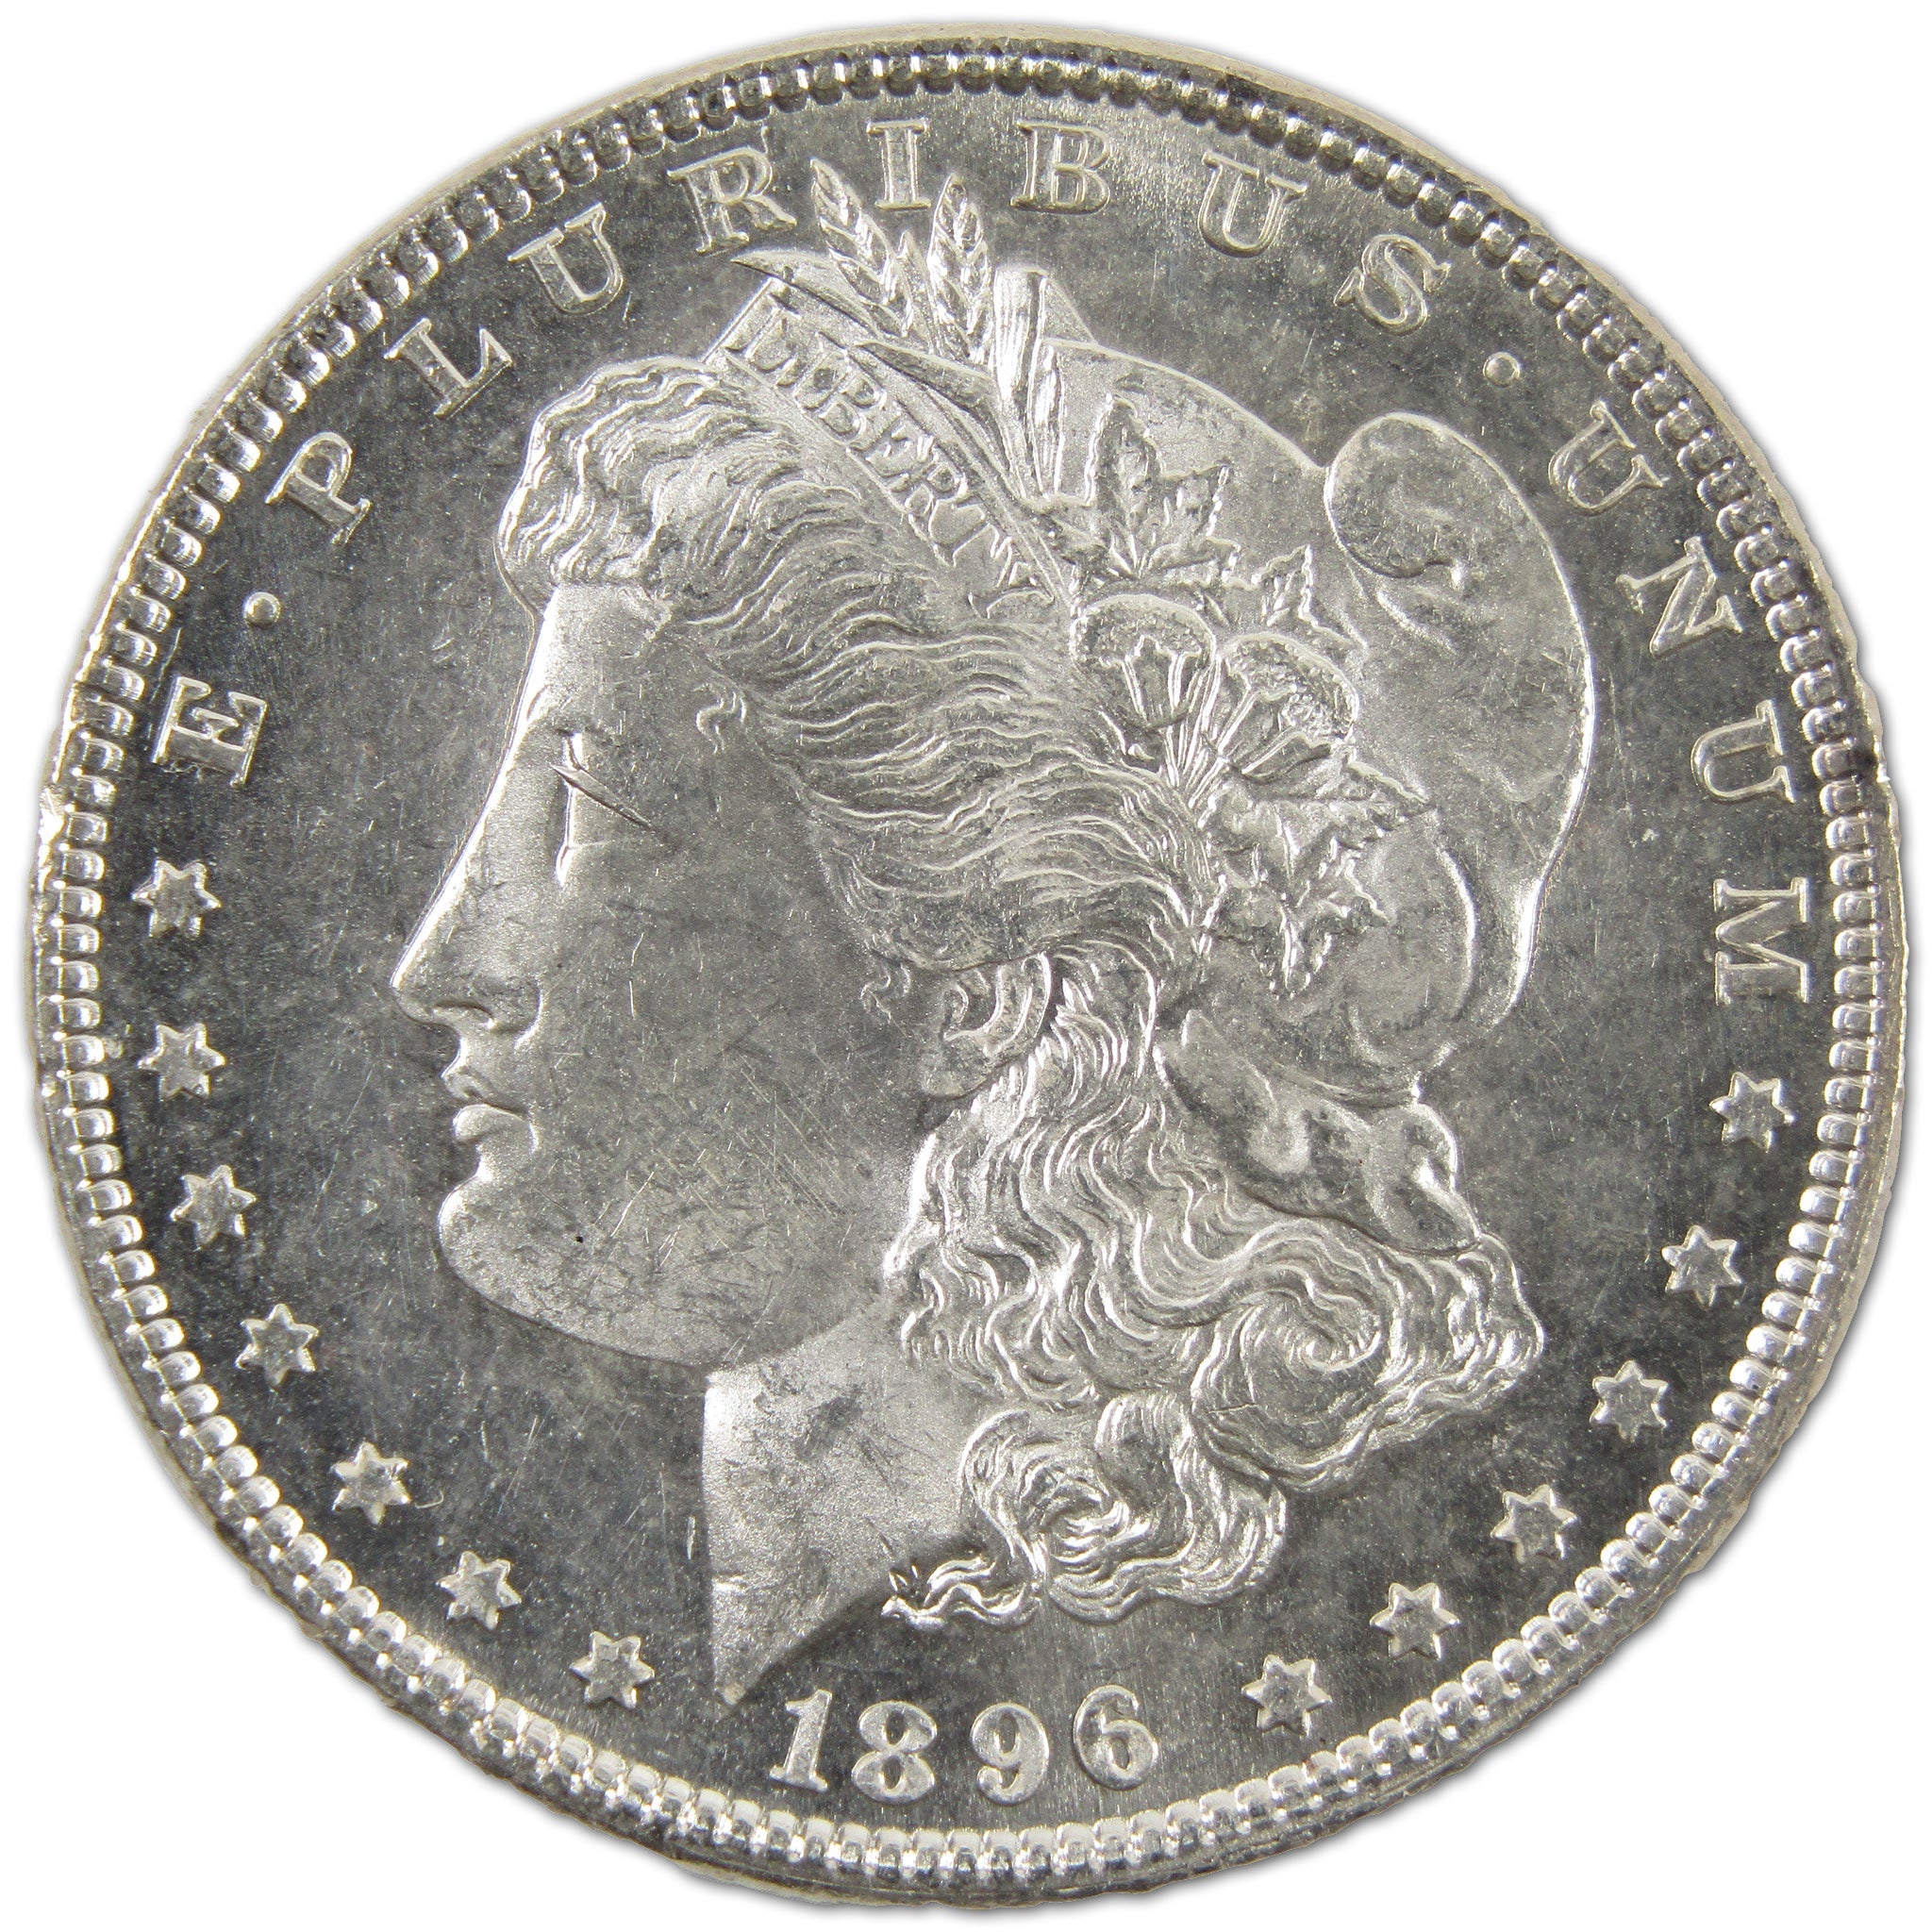 1896 Morgan Dollar BU Uncirculated Silver $1 Proof-Like SKU:I10871 - Morgan coin - Morgan silver dollar - Morgan silver dollar for sale - Profile Coins &amp; Collectibles